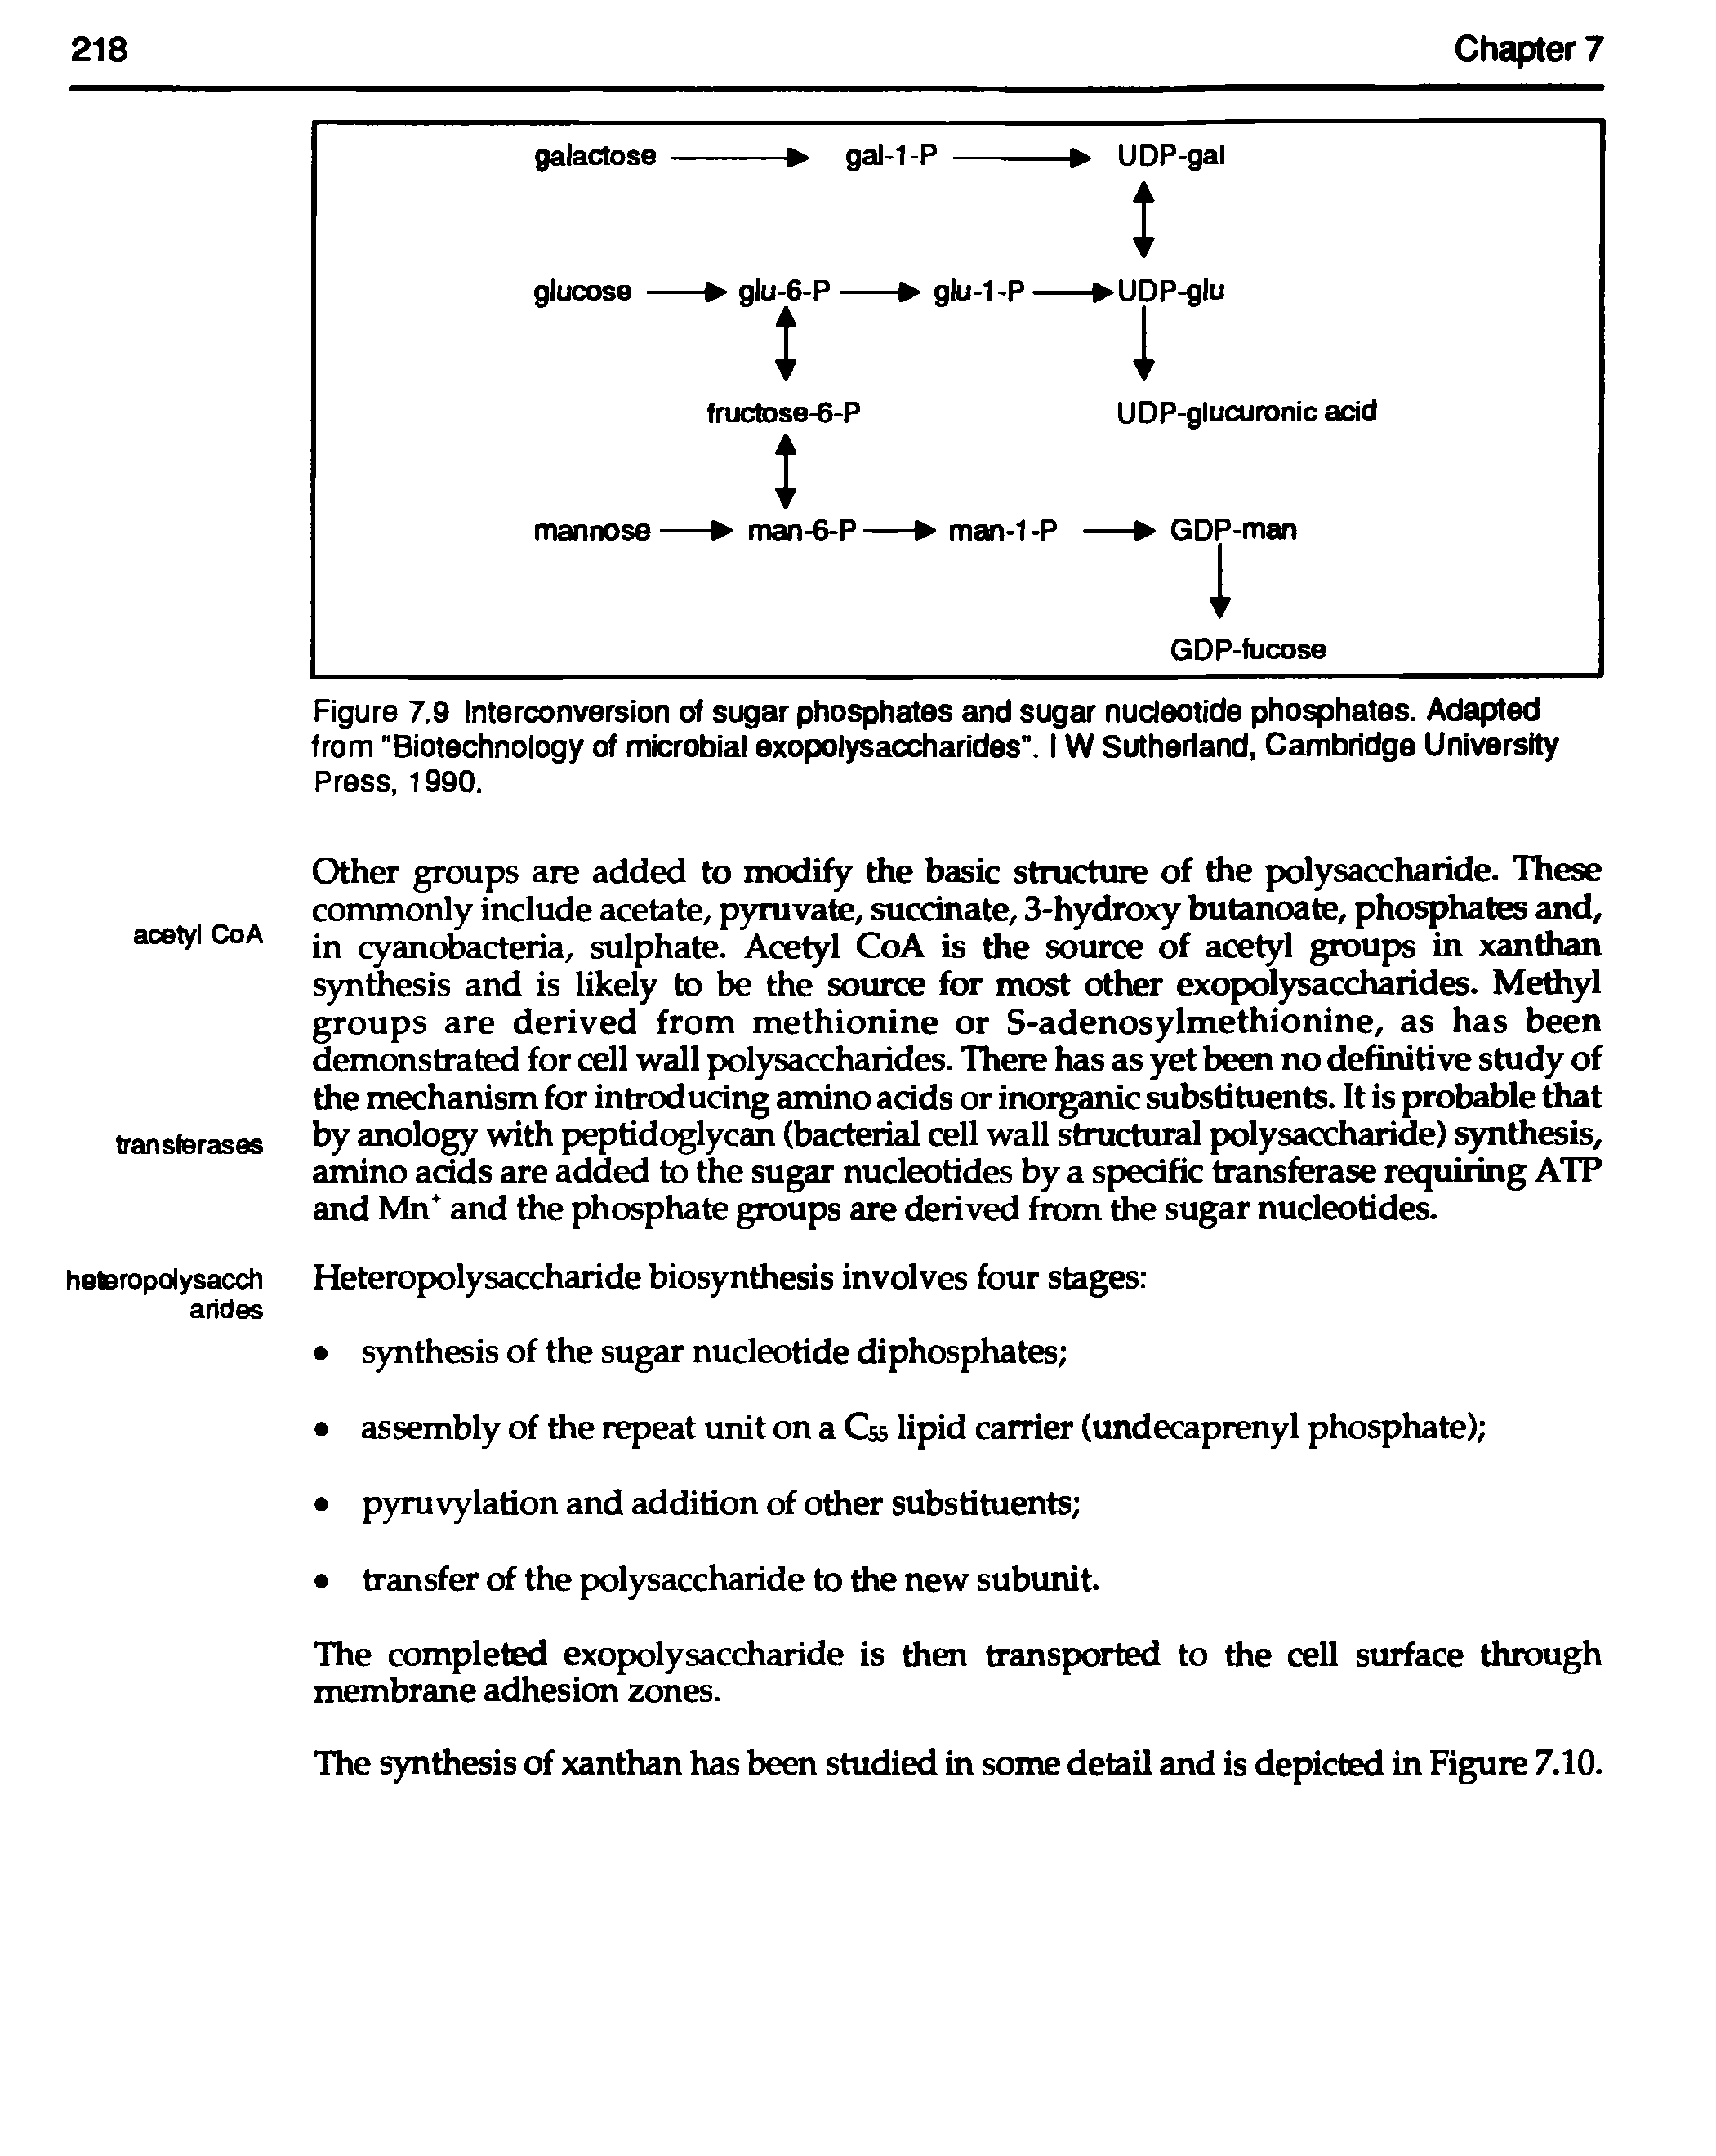 Figure 7.9 Interconversion of sugar phosphates and sugar nucleotide phosphates. Adapted from "Biotechnology of microbial exopolysaccharides". IW Sutherland, Cambridge University Press, 1990.